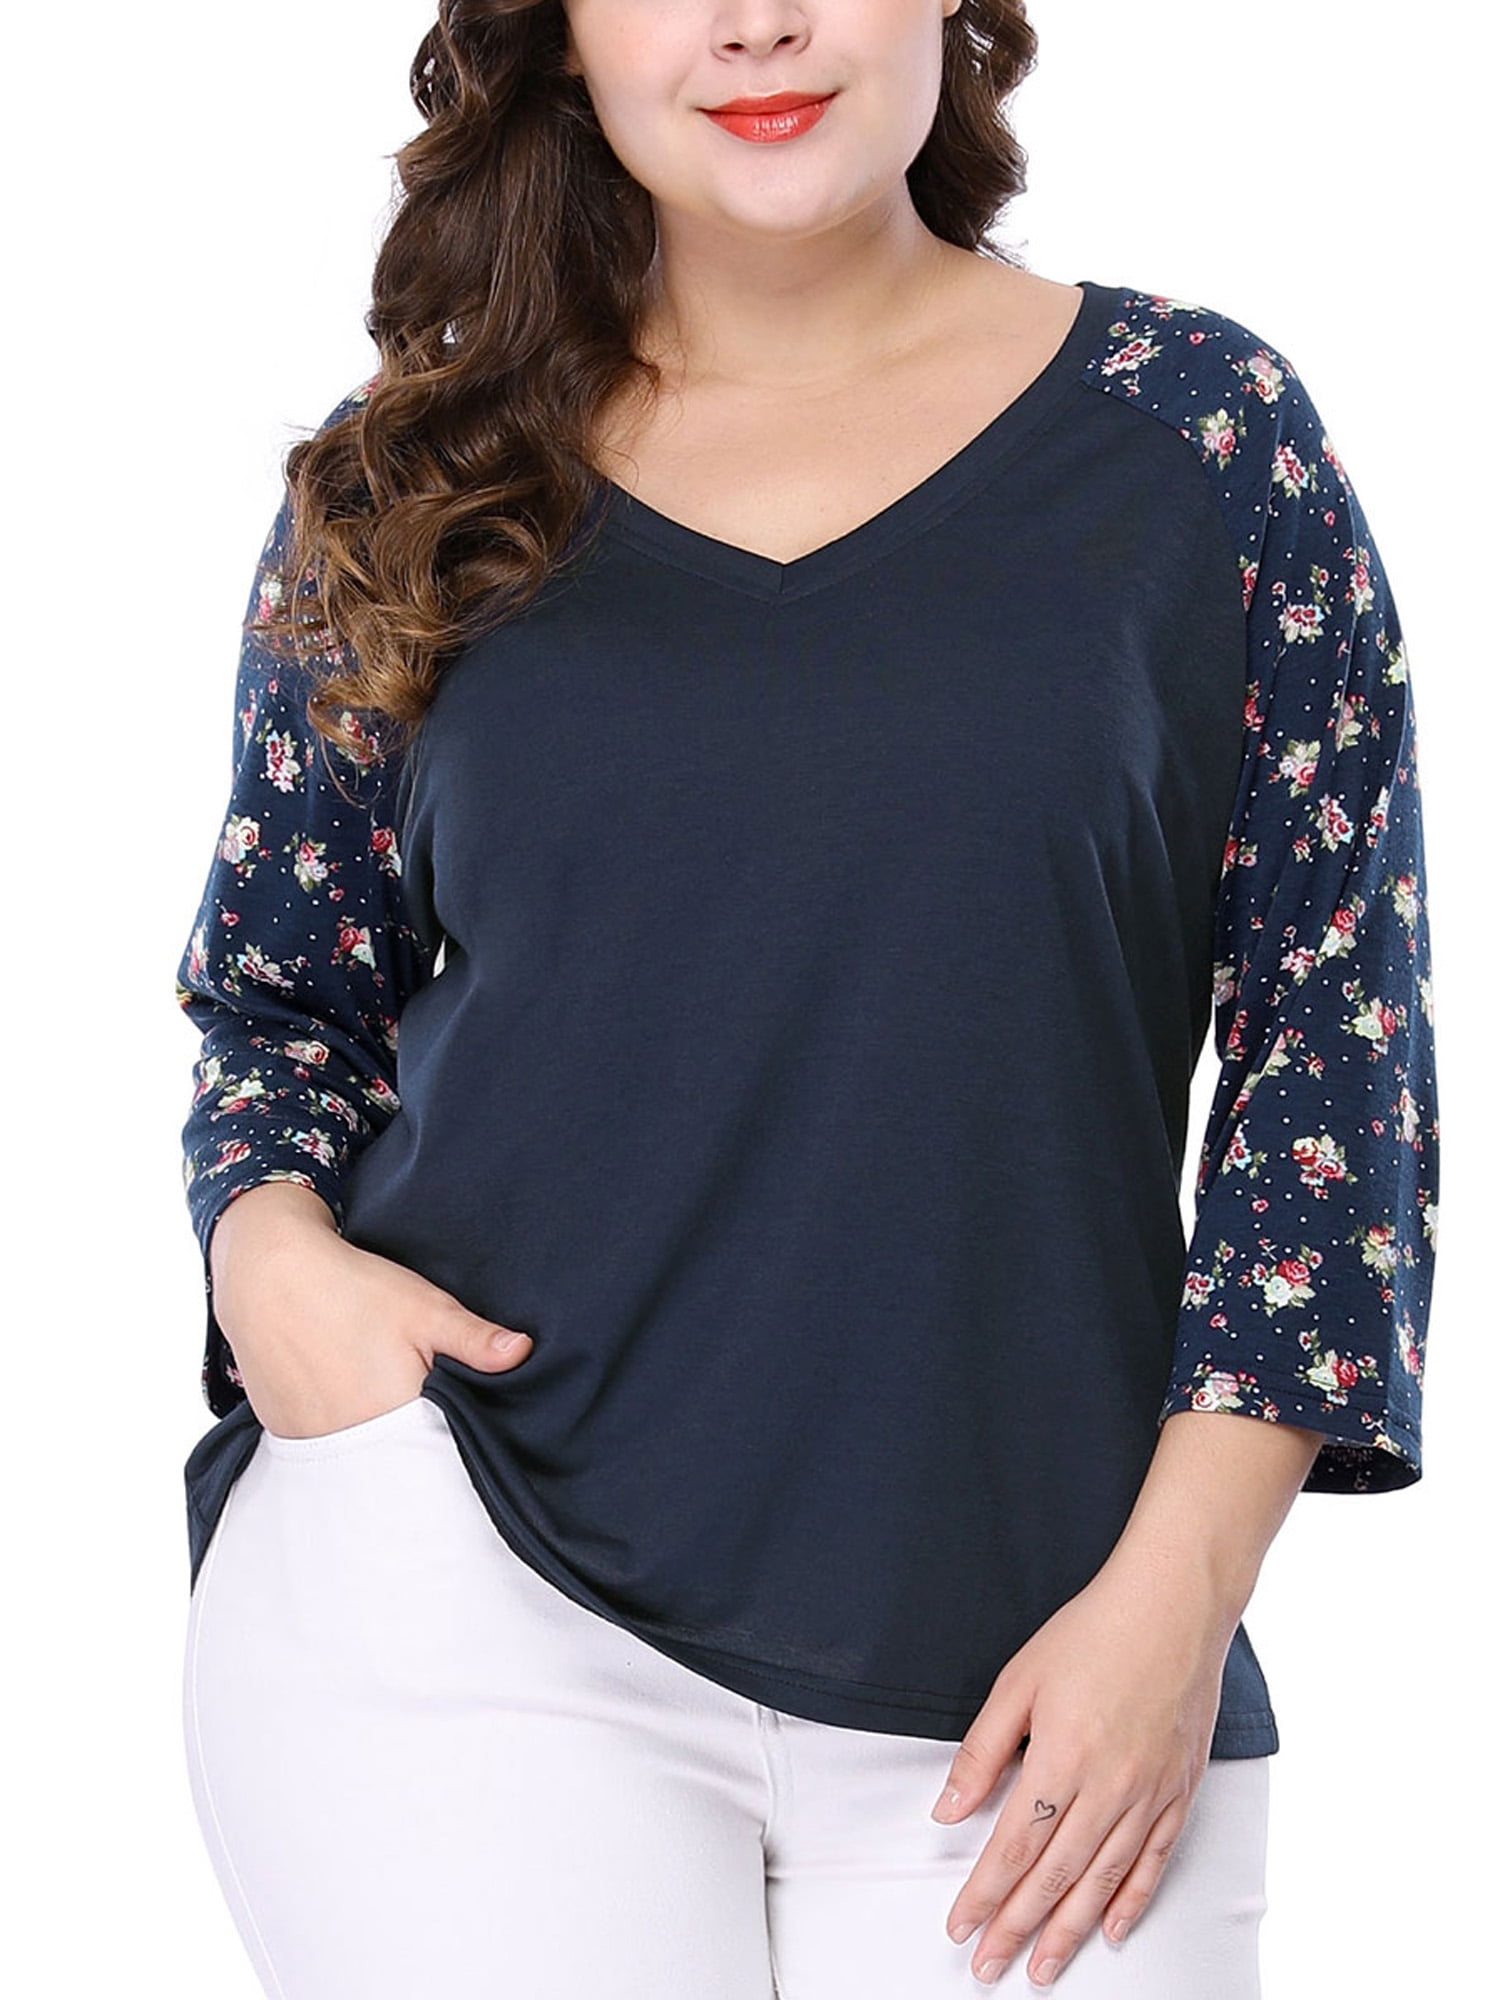 Chicwe Womens Plus Size Raglan Sleeves Floral Printed Top Casual and Work Tunic